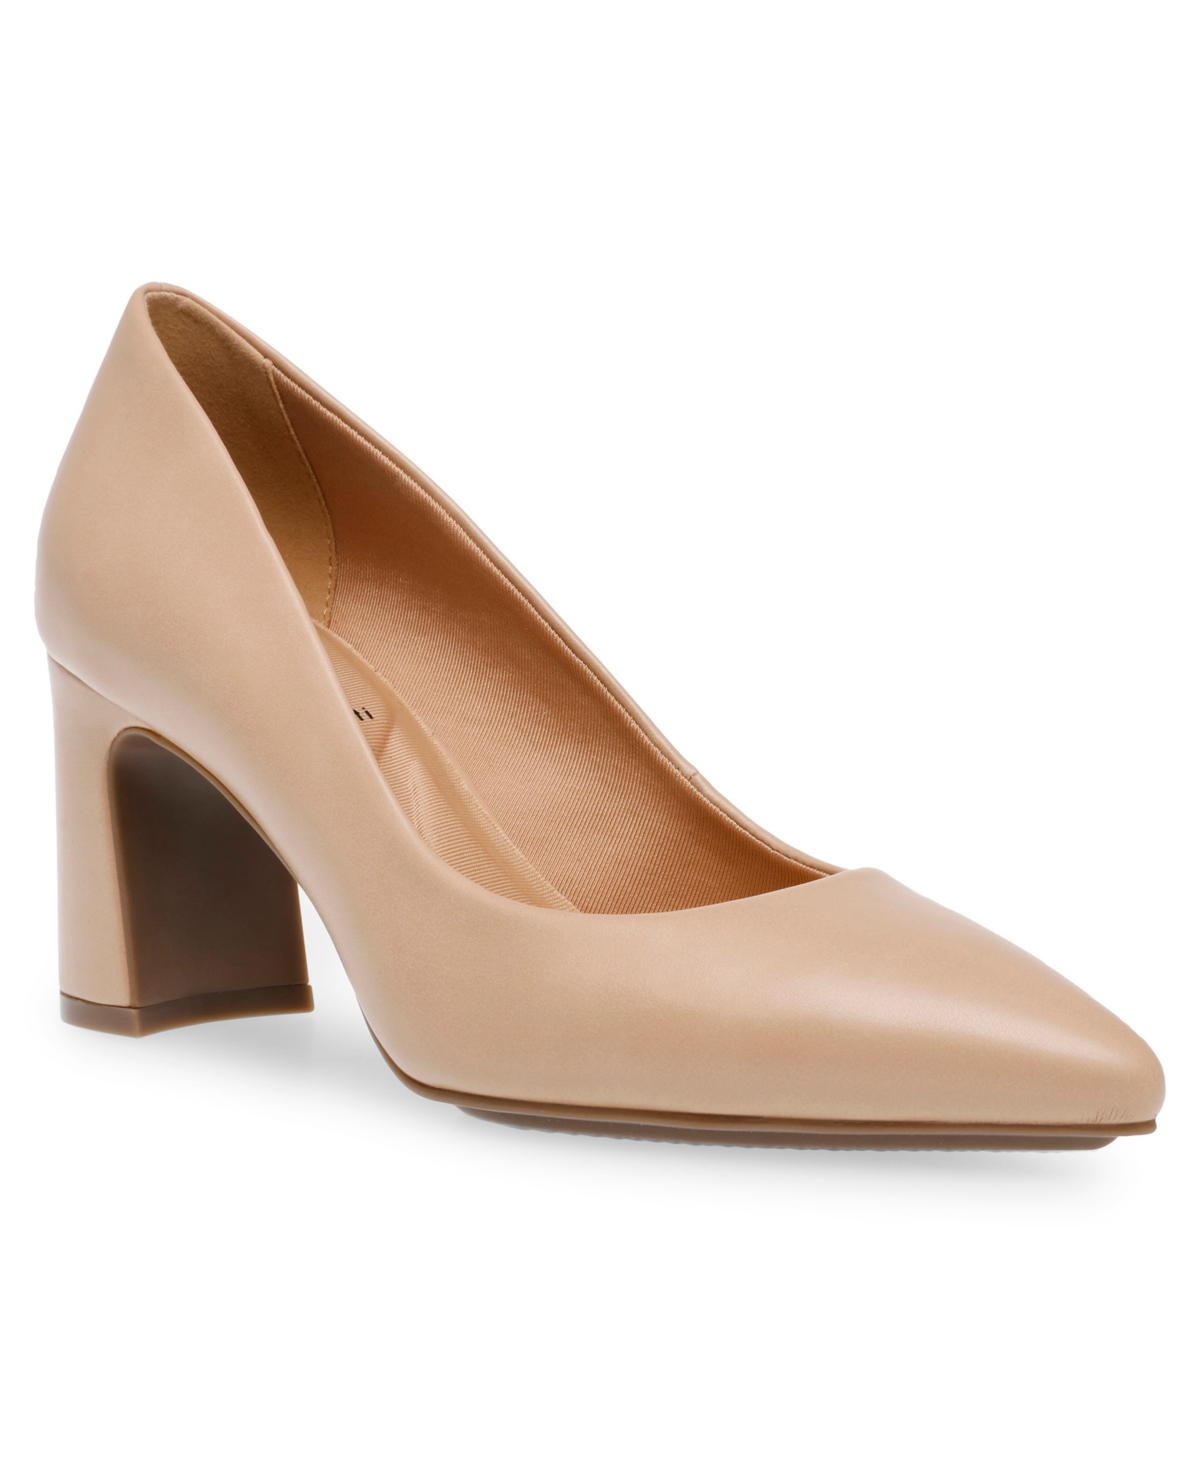 Women's Banks Pointed Toe Pumps - Nude